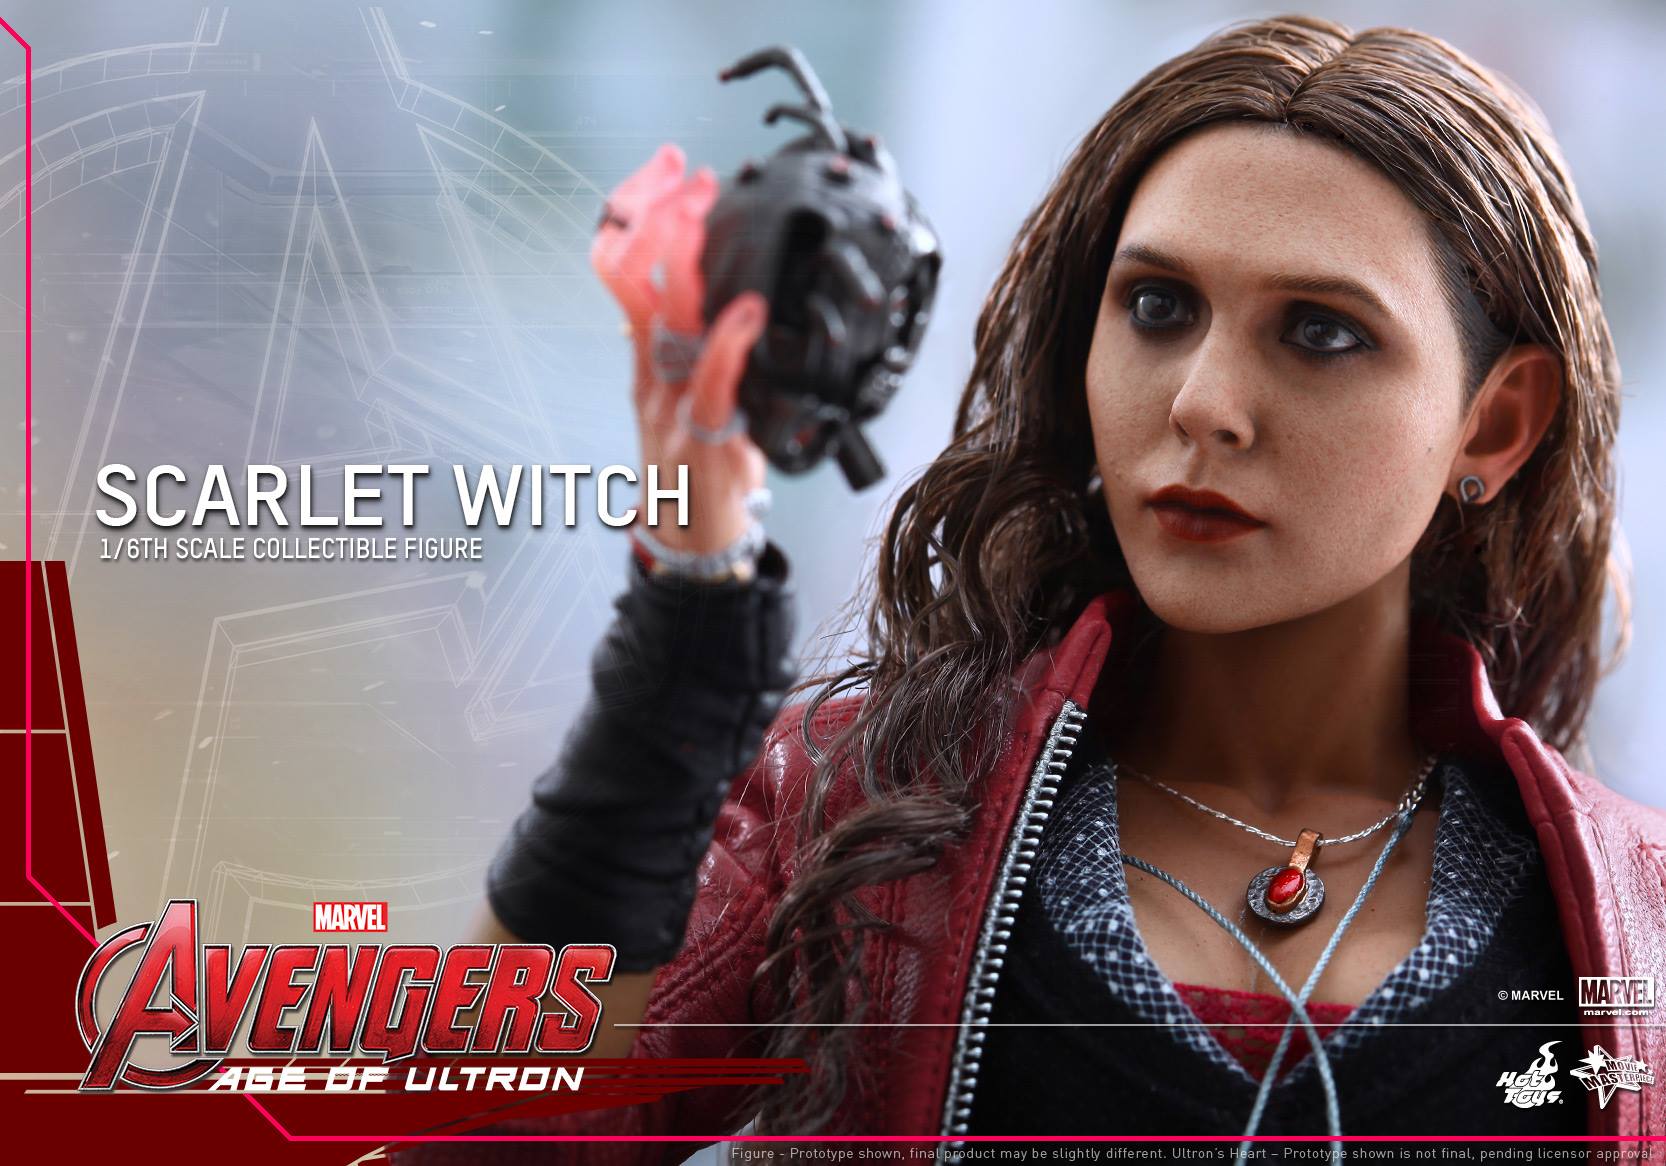 Hot Toys Announces Avengers: Age of Ultron Scarlet Witch